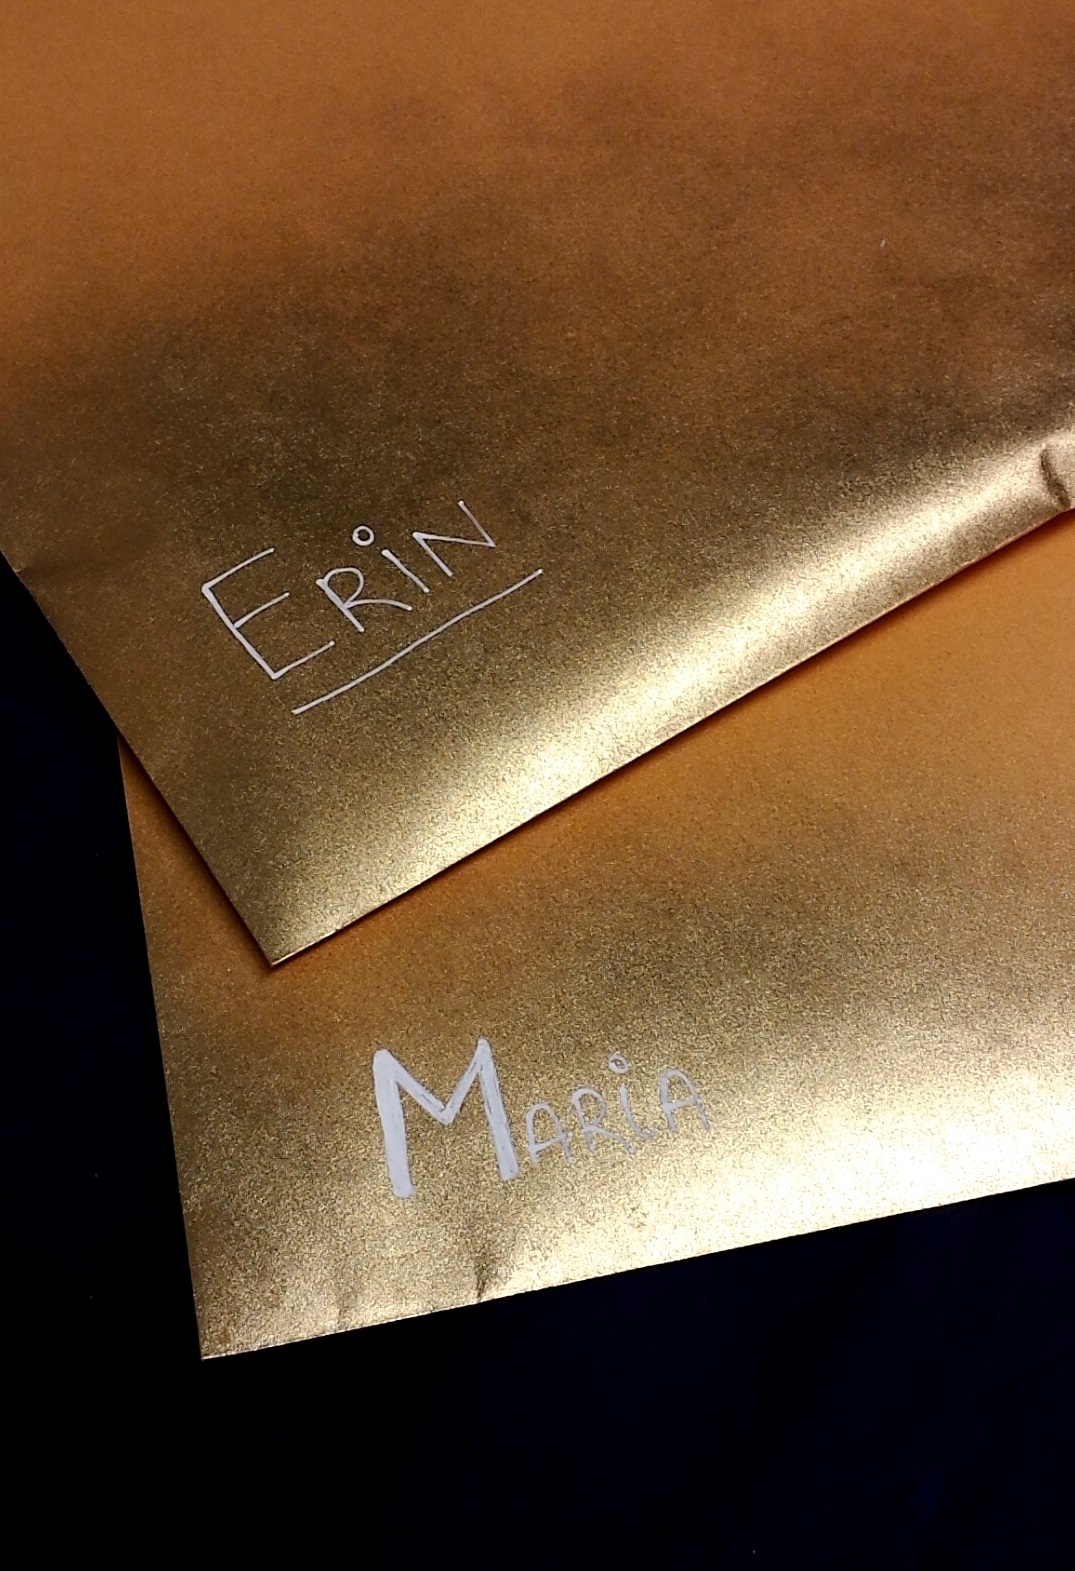 The gold motif on a manilla envelope.